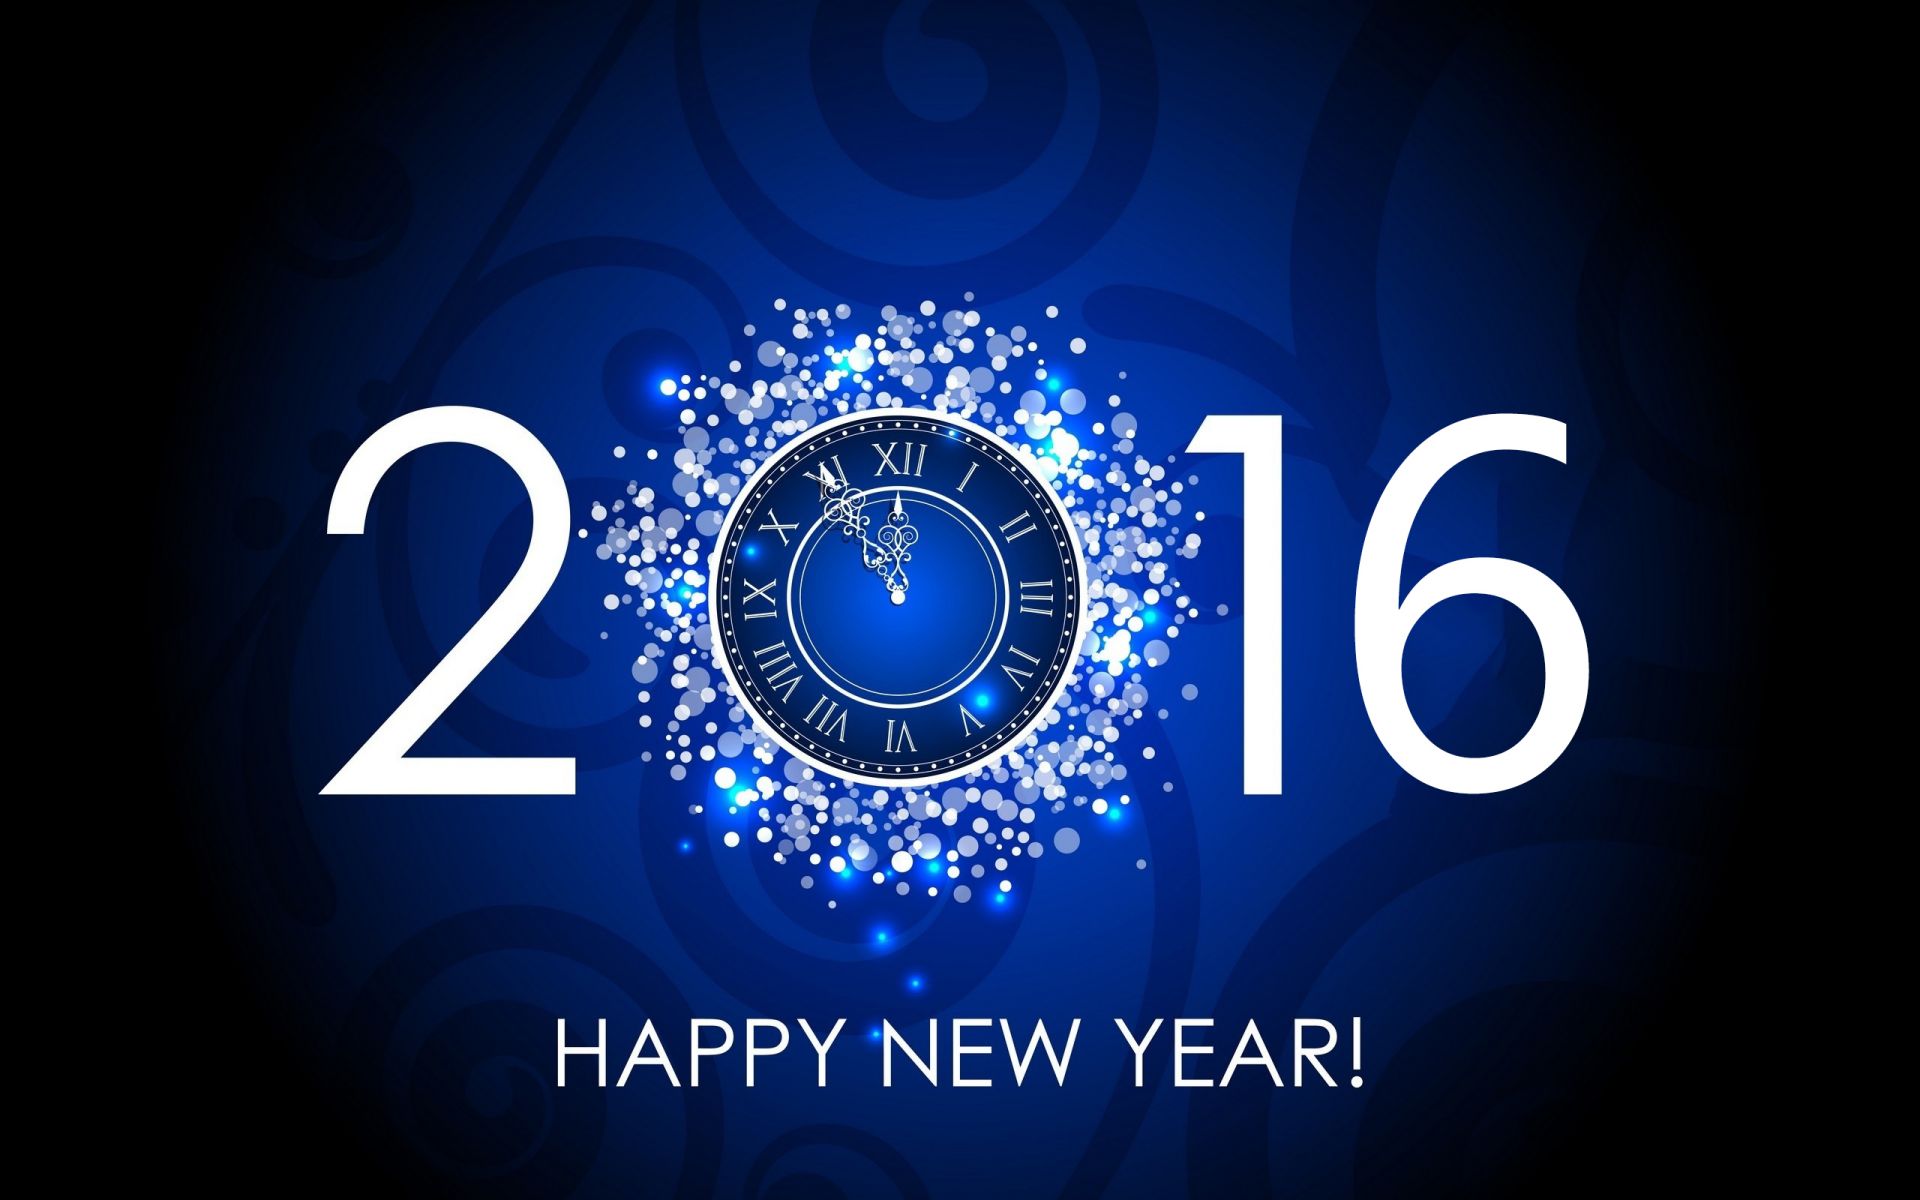 New Year HD Happy Wallpaper For Mobile And Desktop